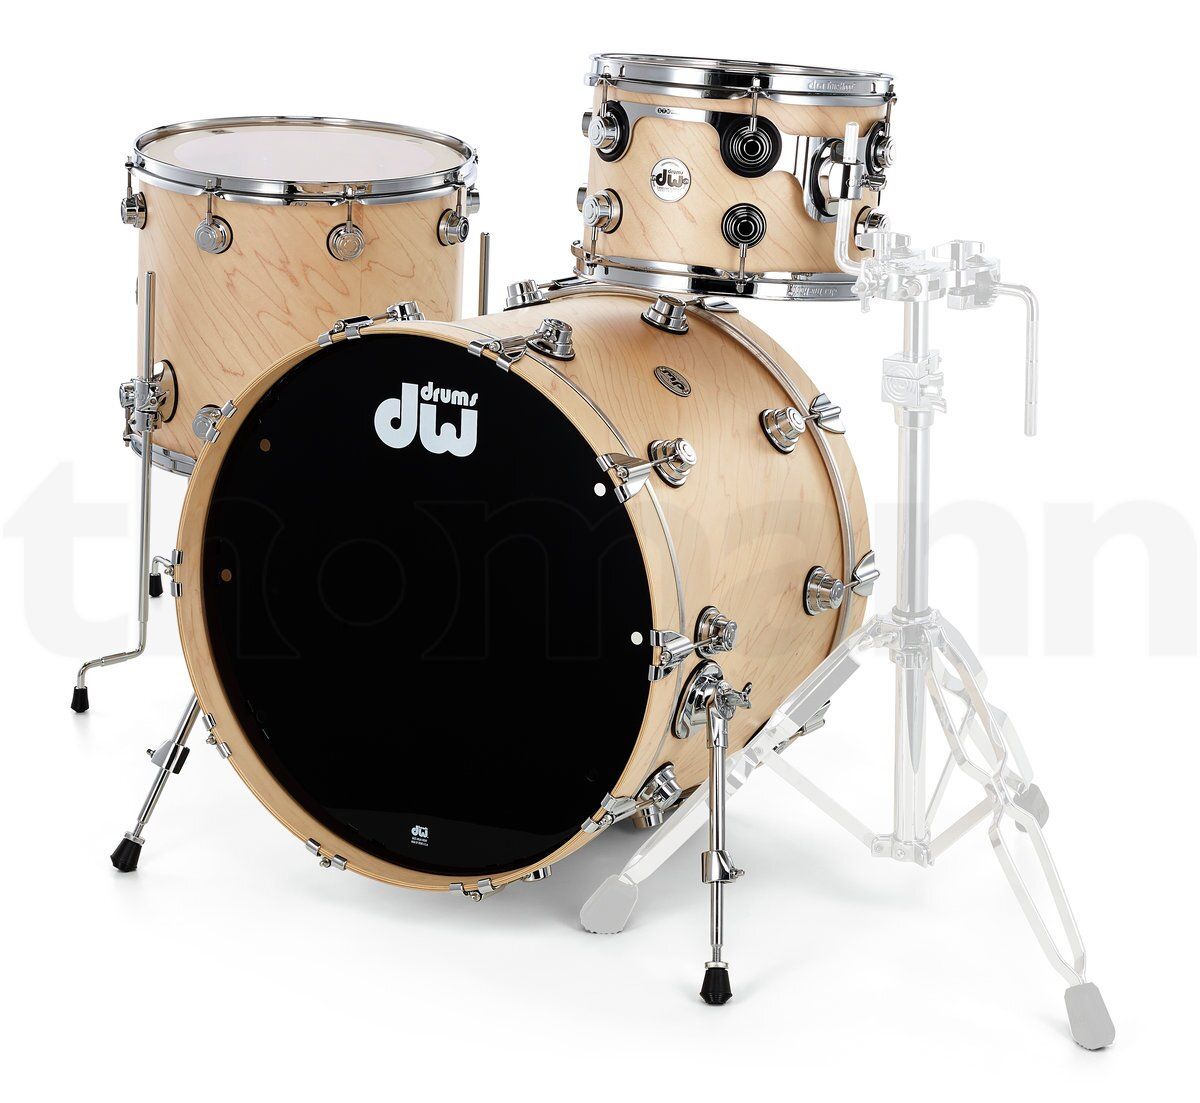 Shell set. Sonor Smart Wood Shell. DW Satin Oil 12" Tom. DW Performance Lacquer. DW Design 14x6.